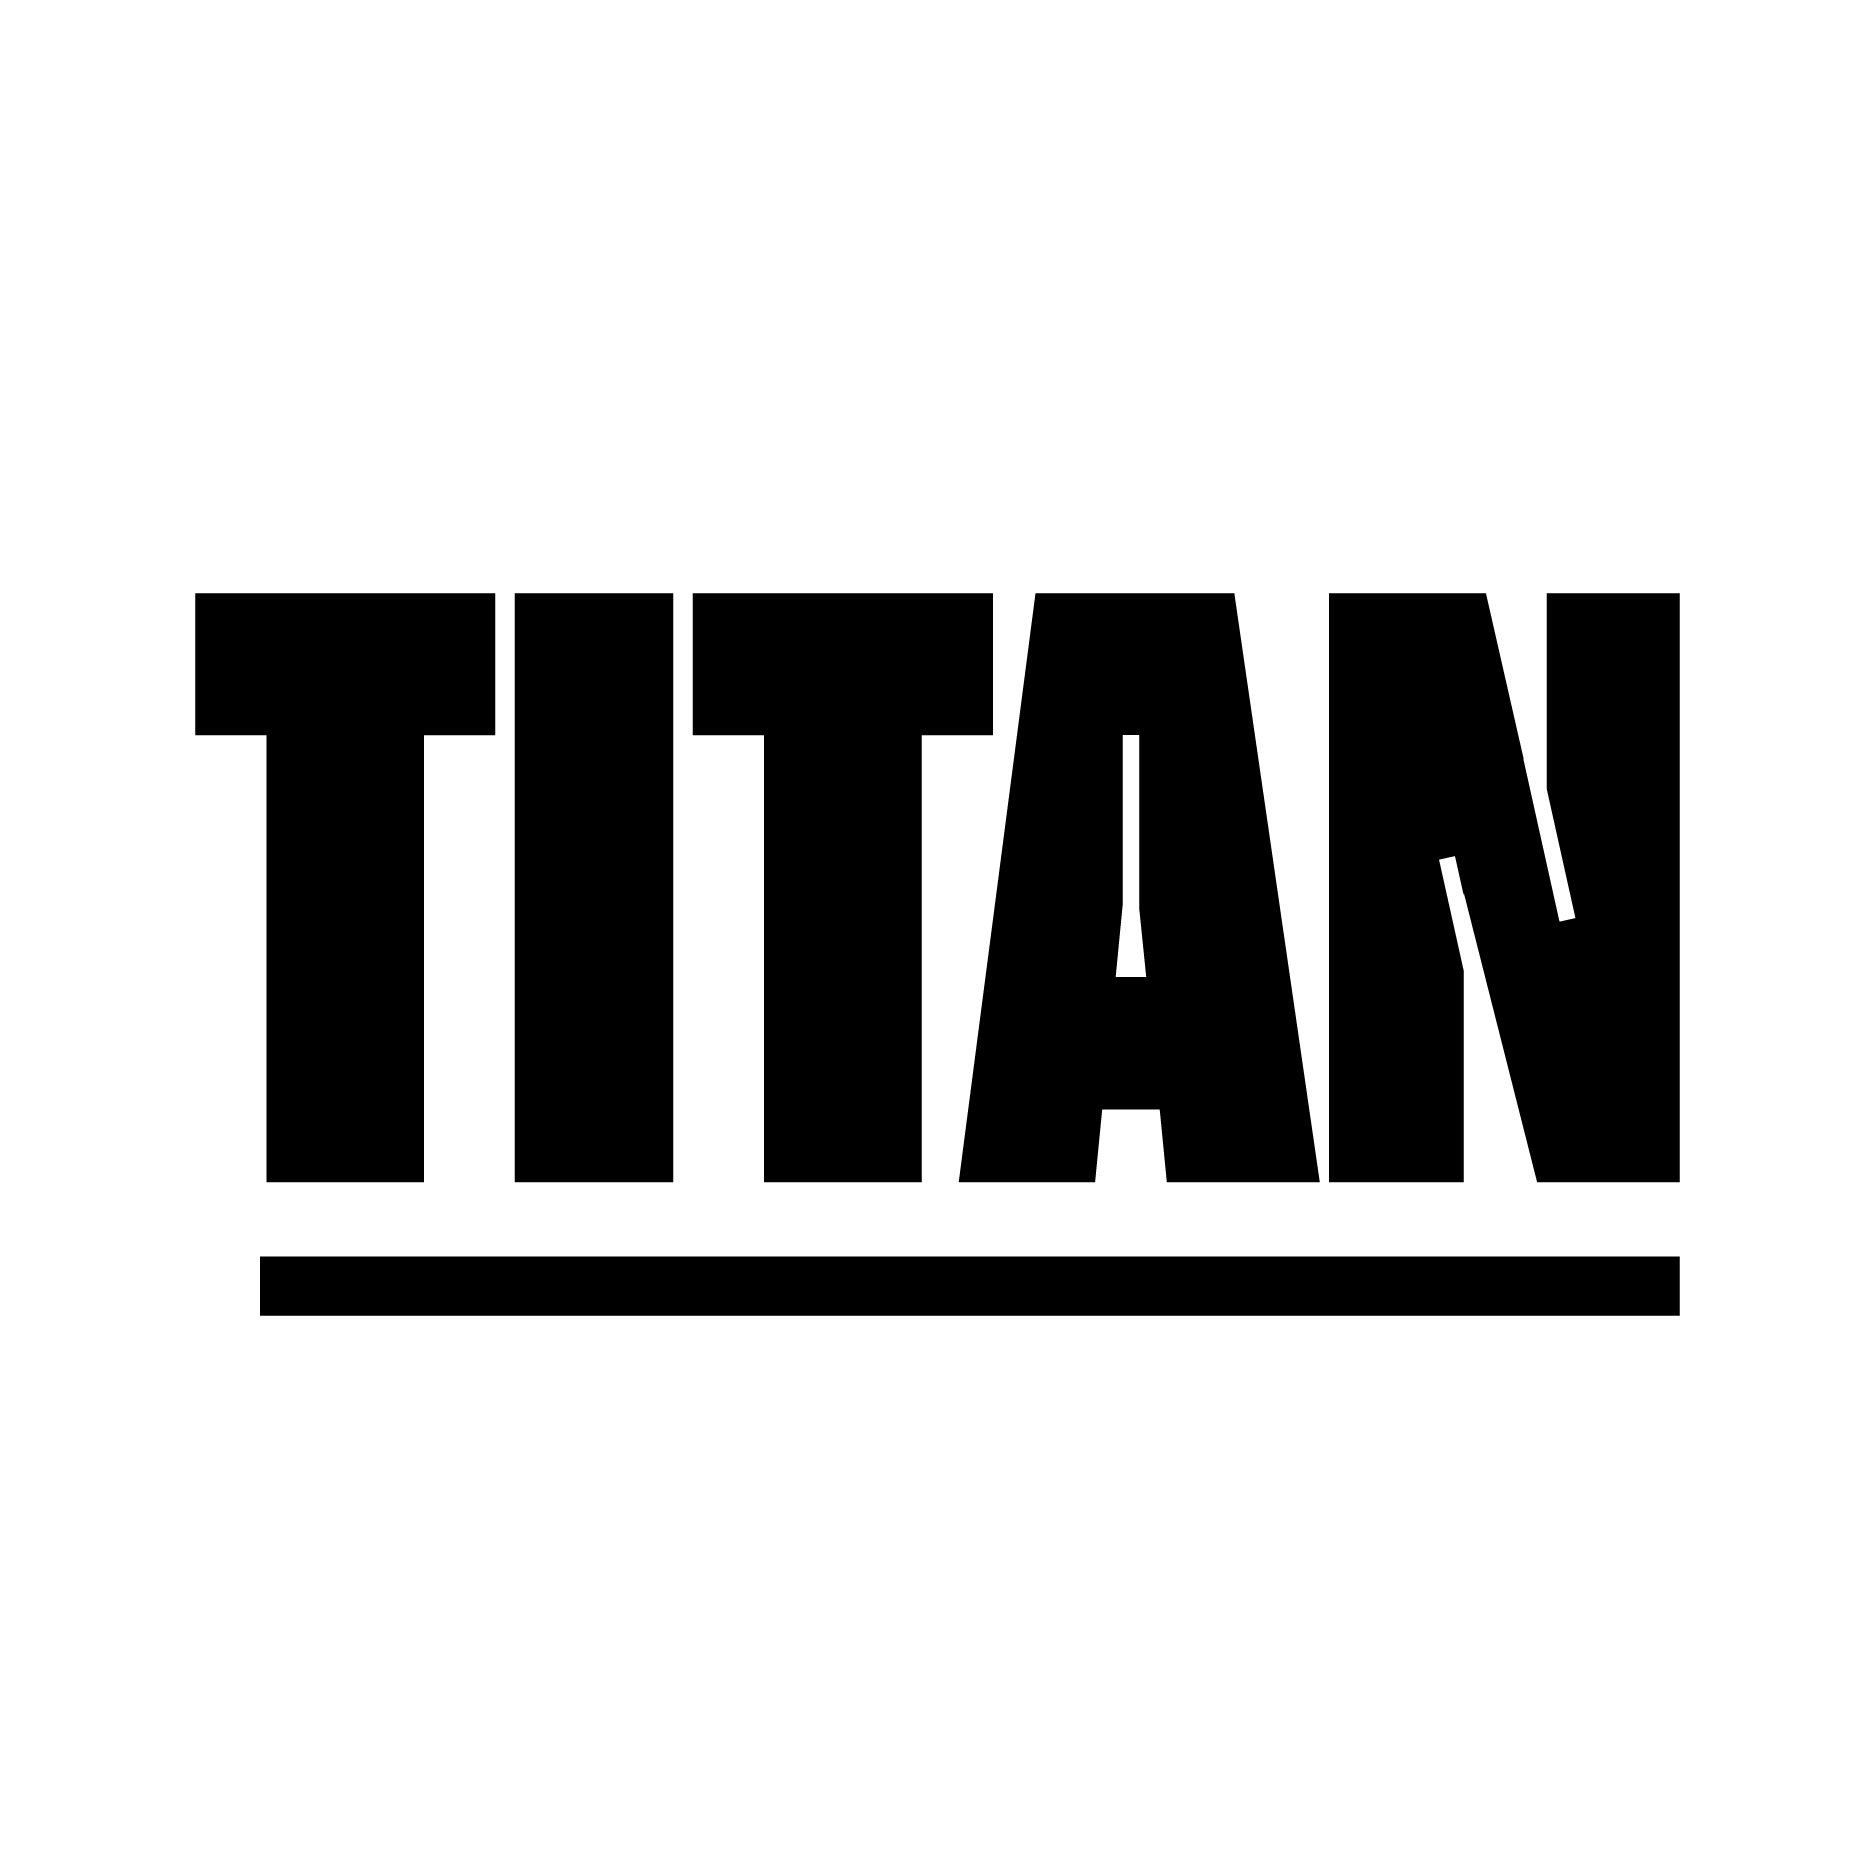 Titan Holdings logo design by logo designer Mythic for your inspiration and for the worlds largest logo competition